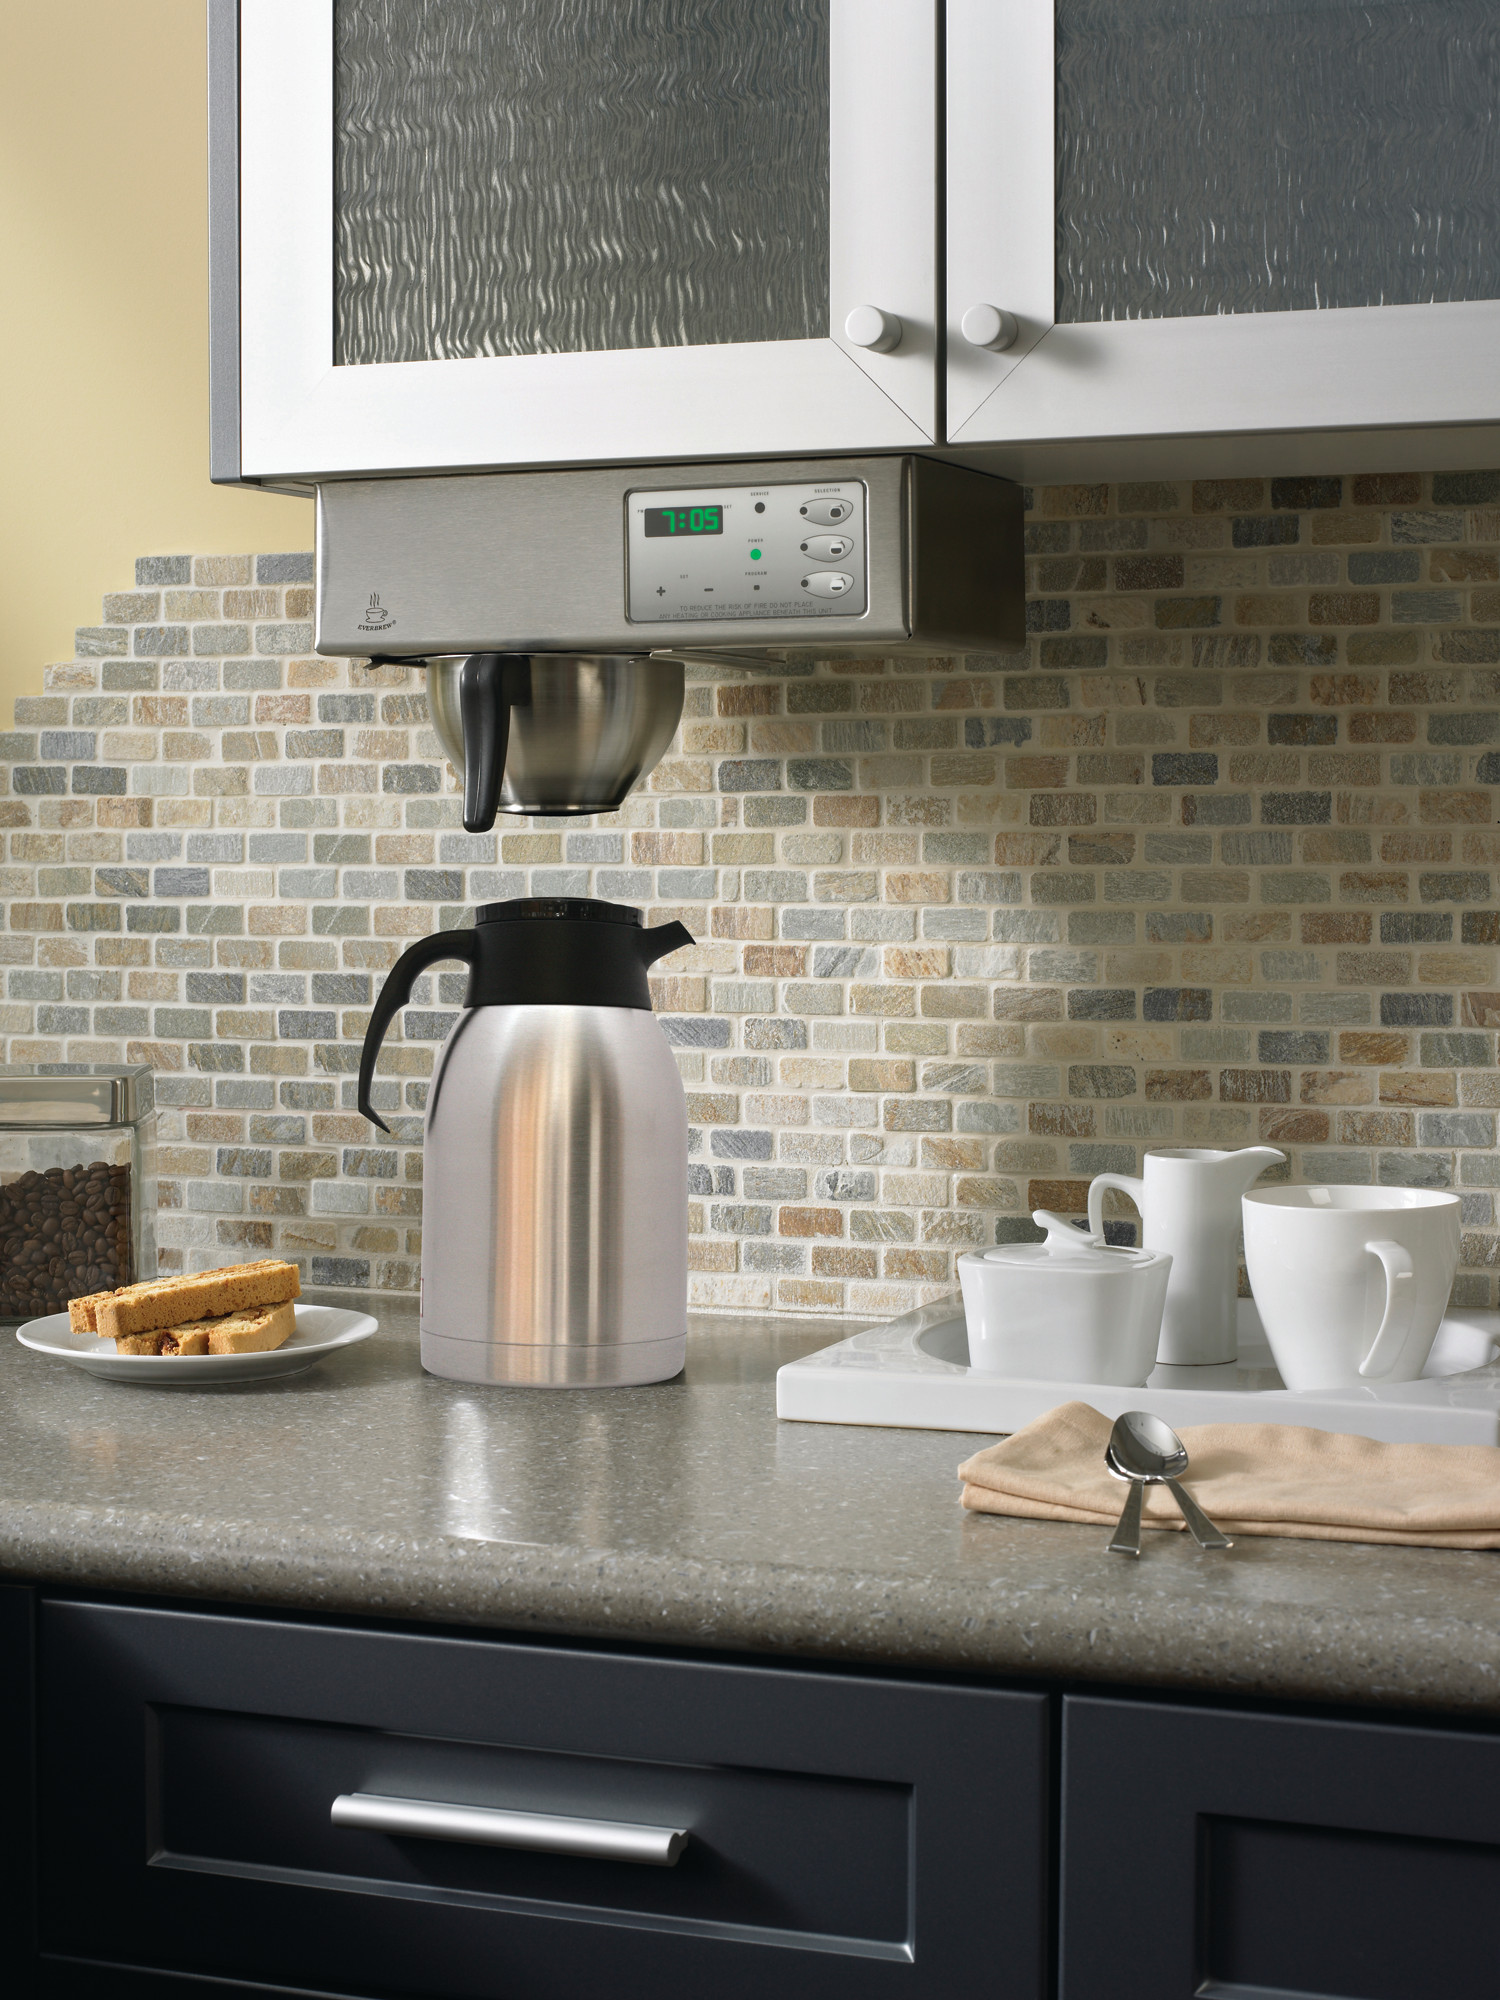 https://st.hzcdn.com/simgs/pictures/kitchens/everbrew-built-in-coffee-maker-water-inc-img~ef81e88d0400f238_14-6840-1-dd81f04.jpg